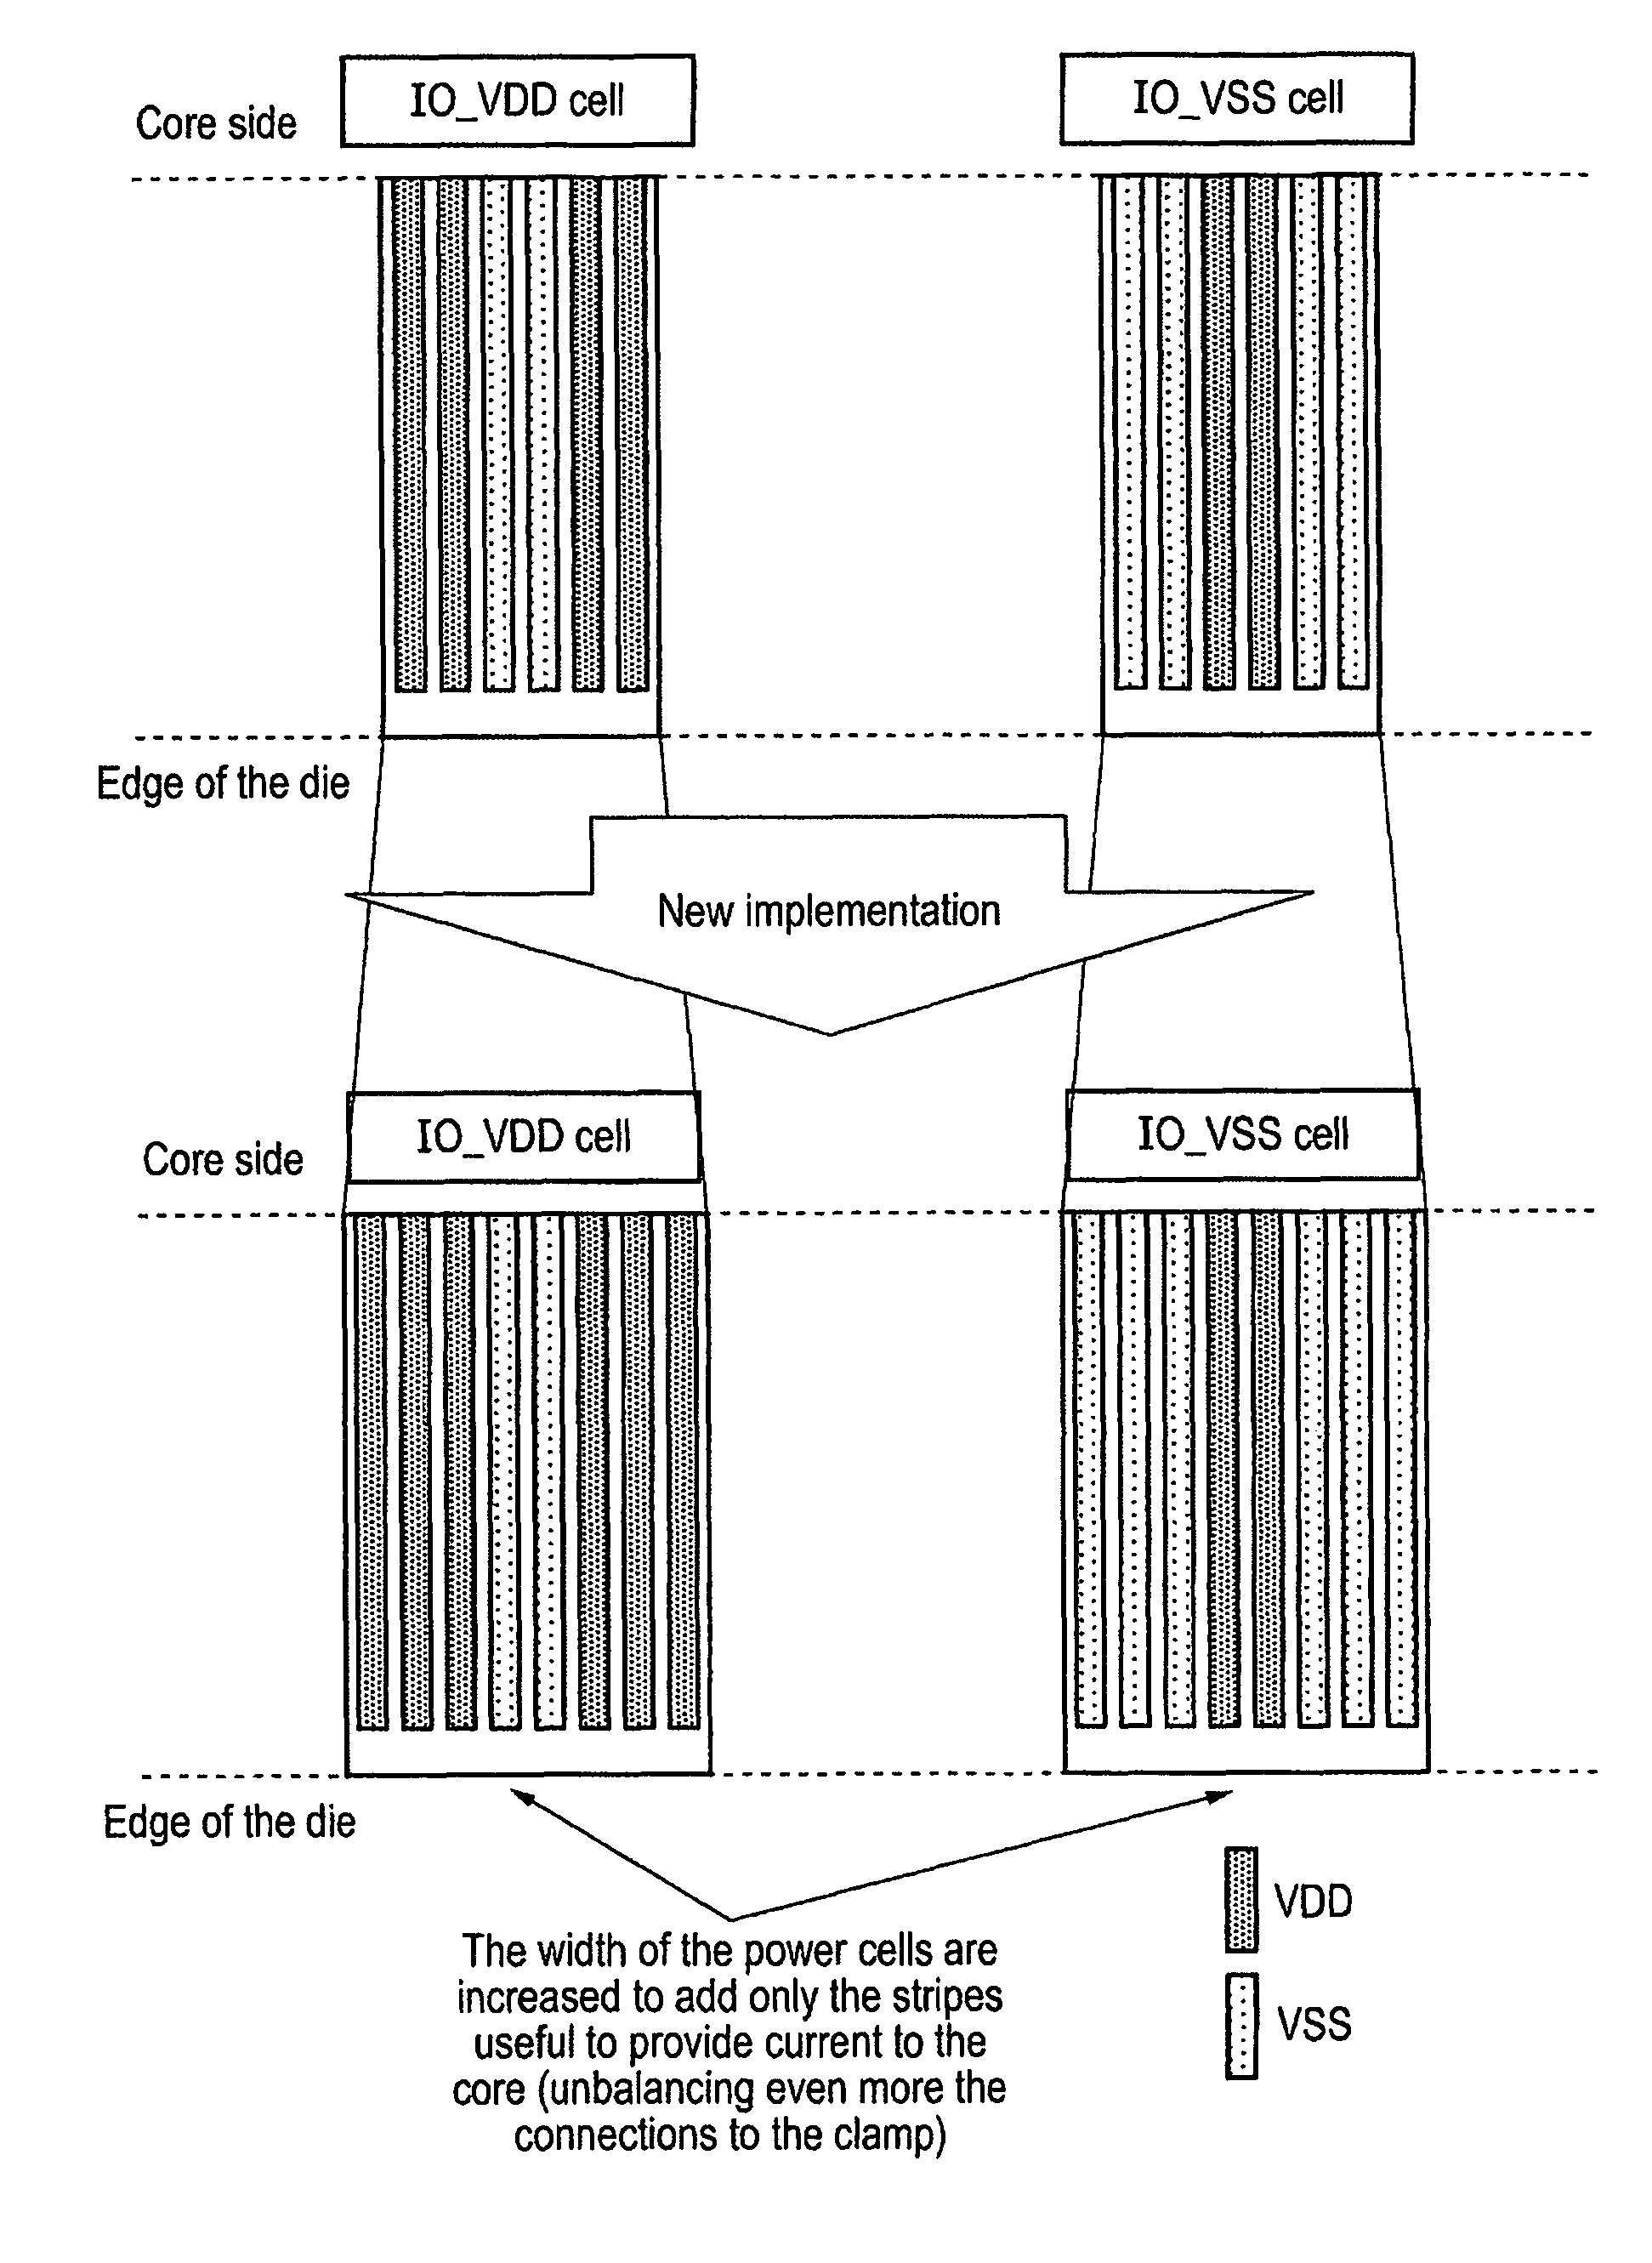 Distributing power to an integrated circuit